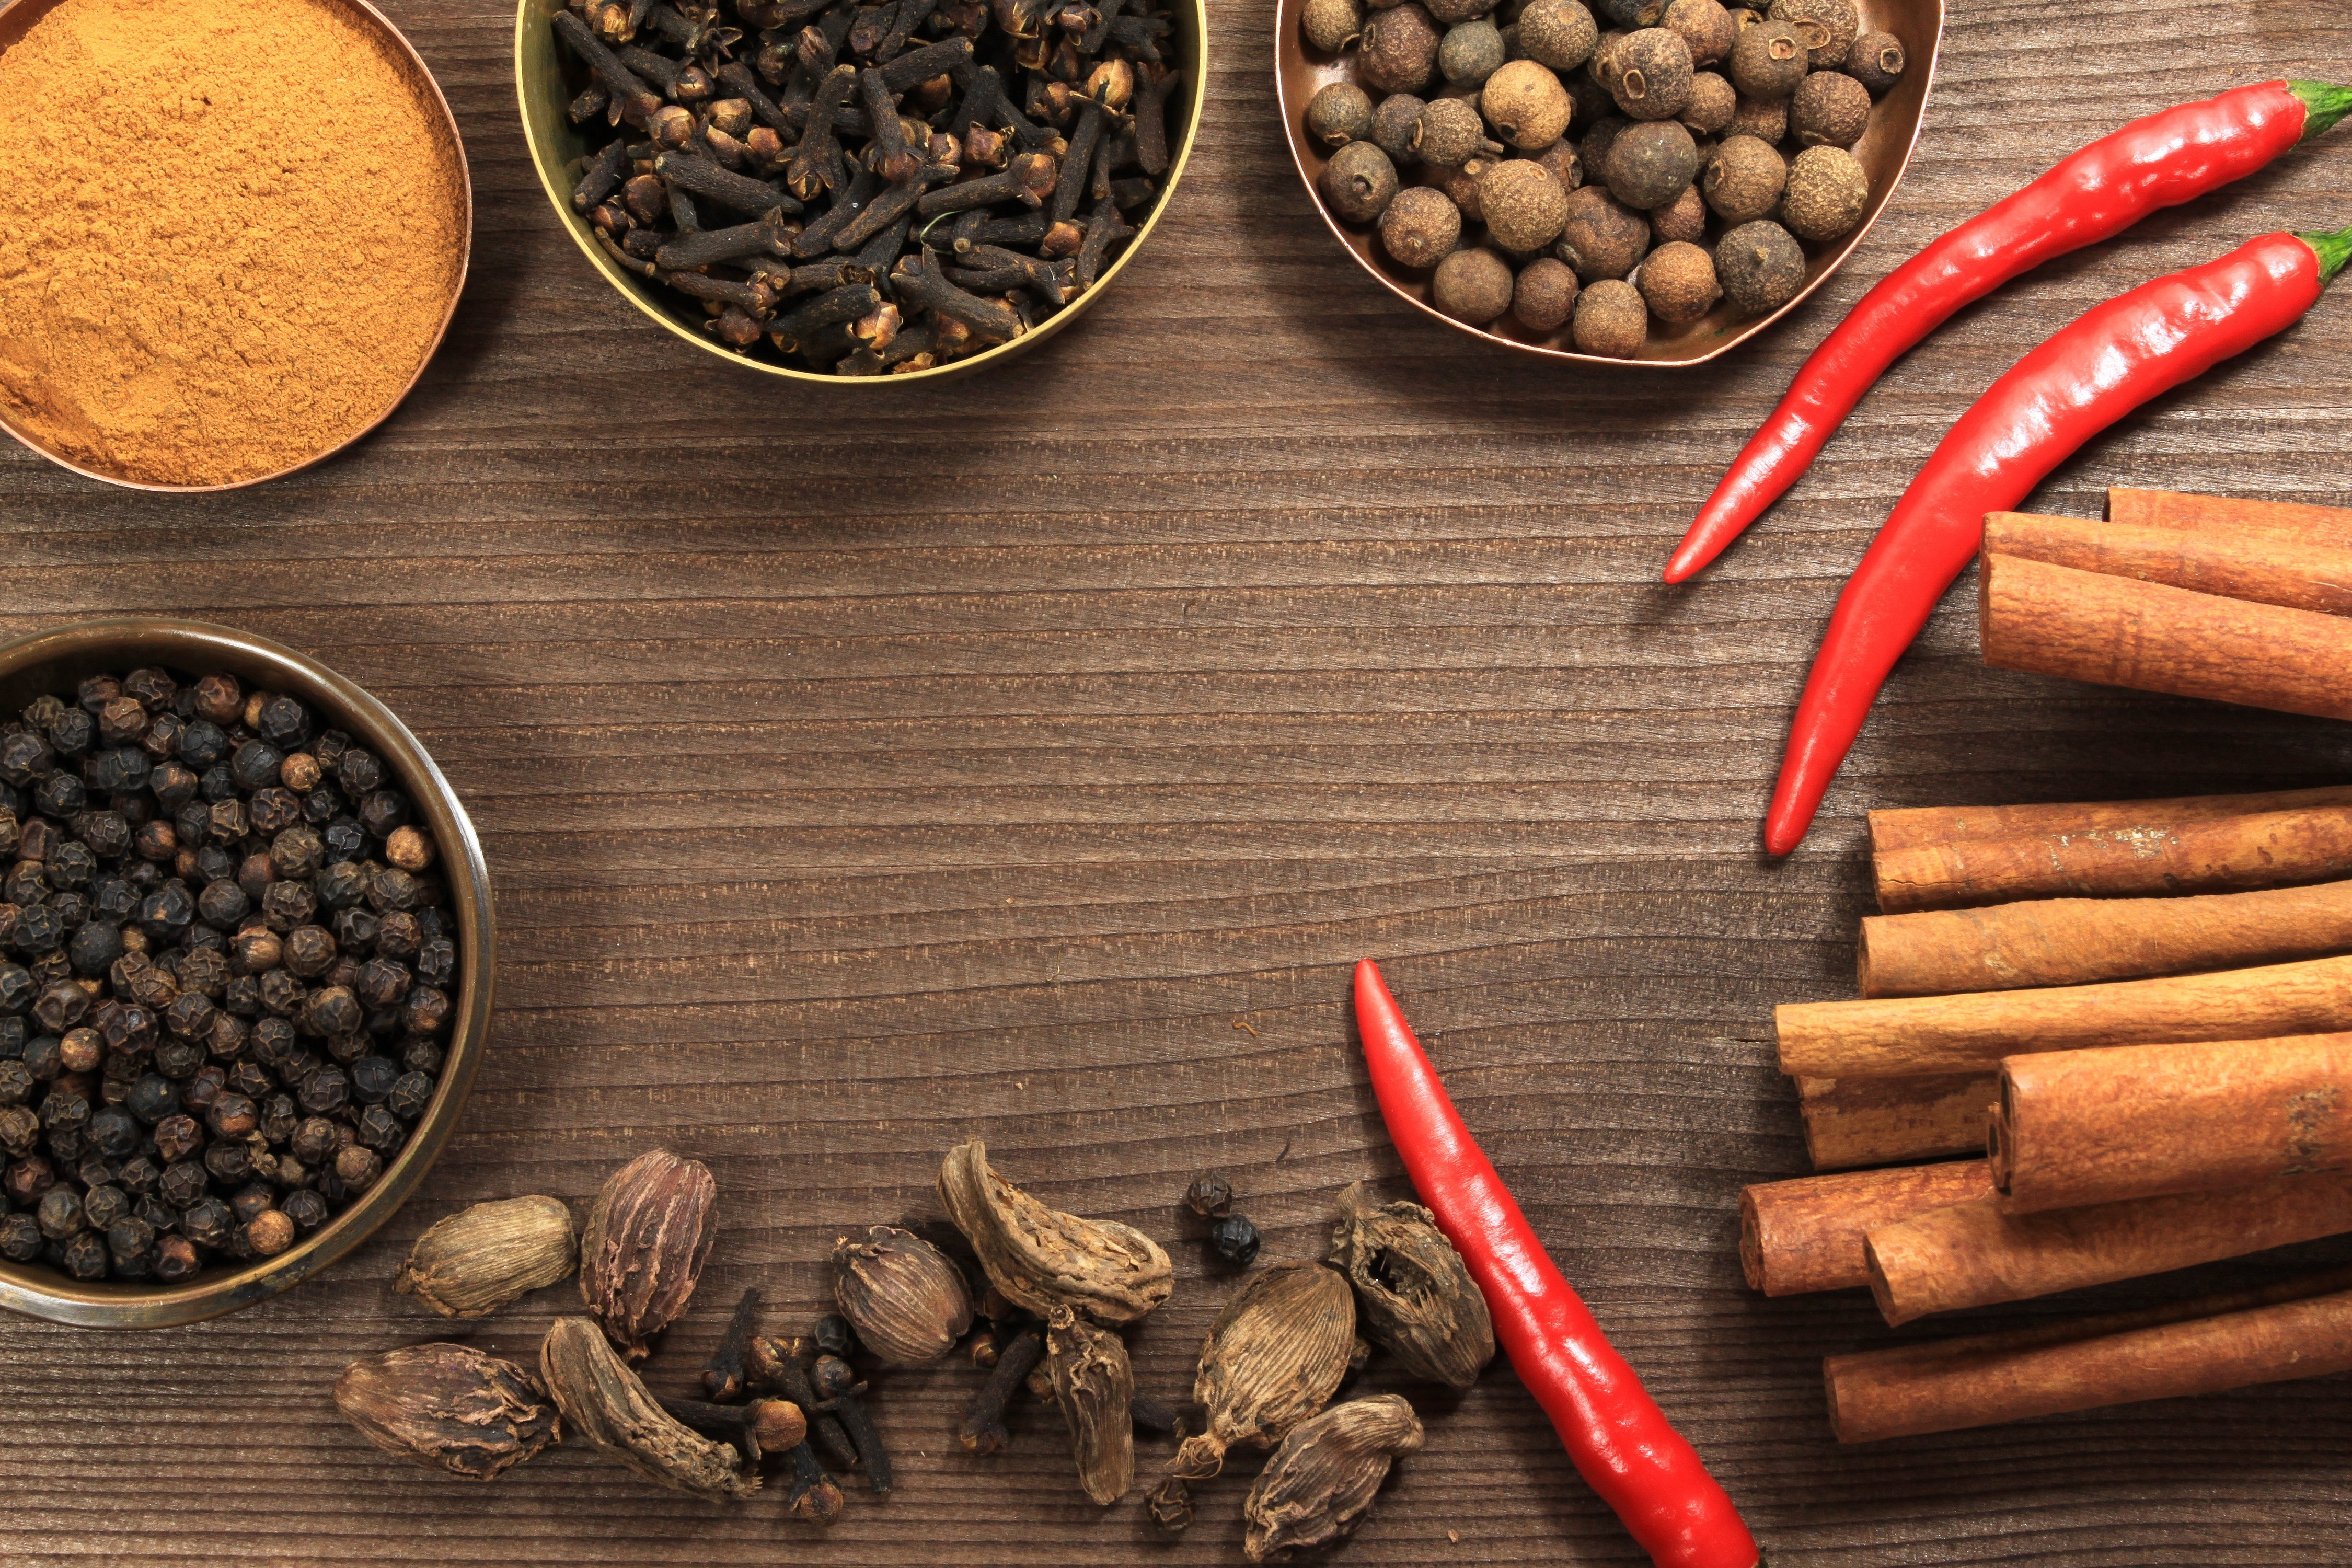 Herbs and Spices 4k Ultra HD Wallpaper | Background Image ...